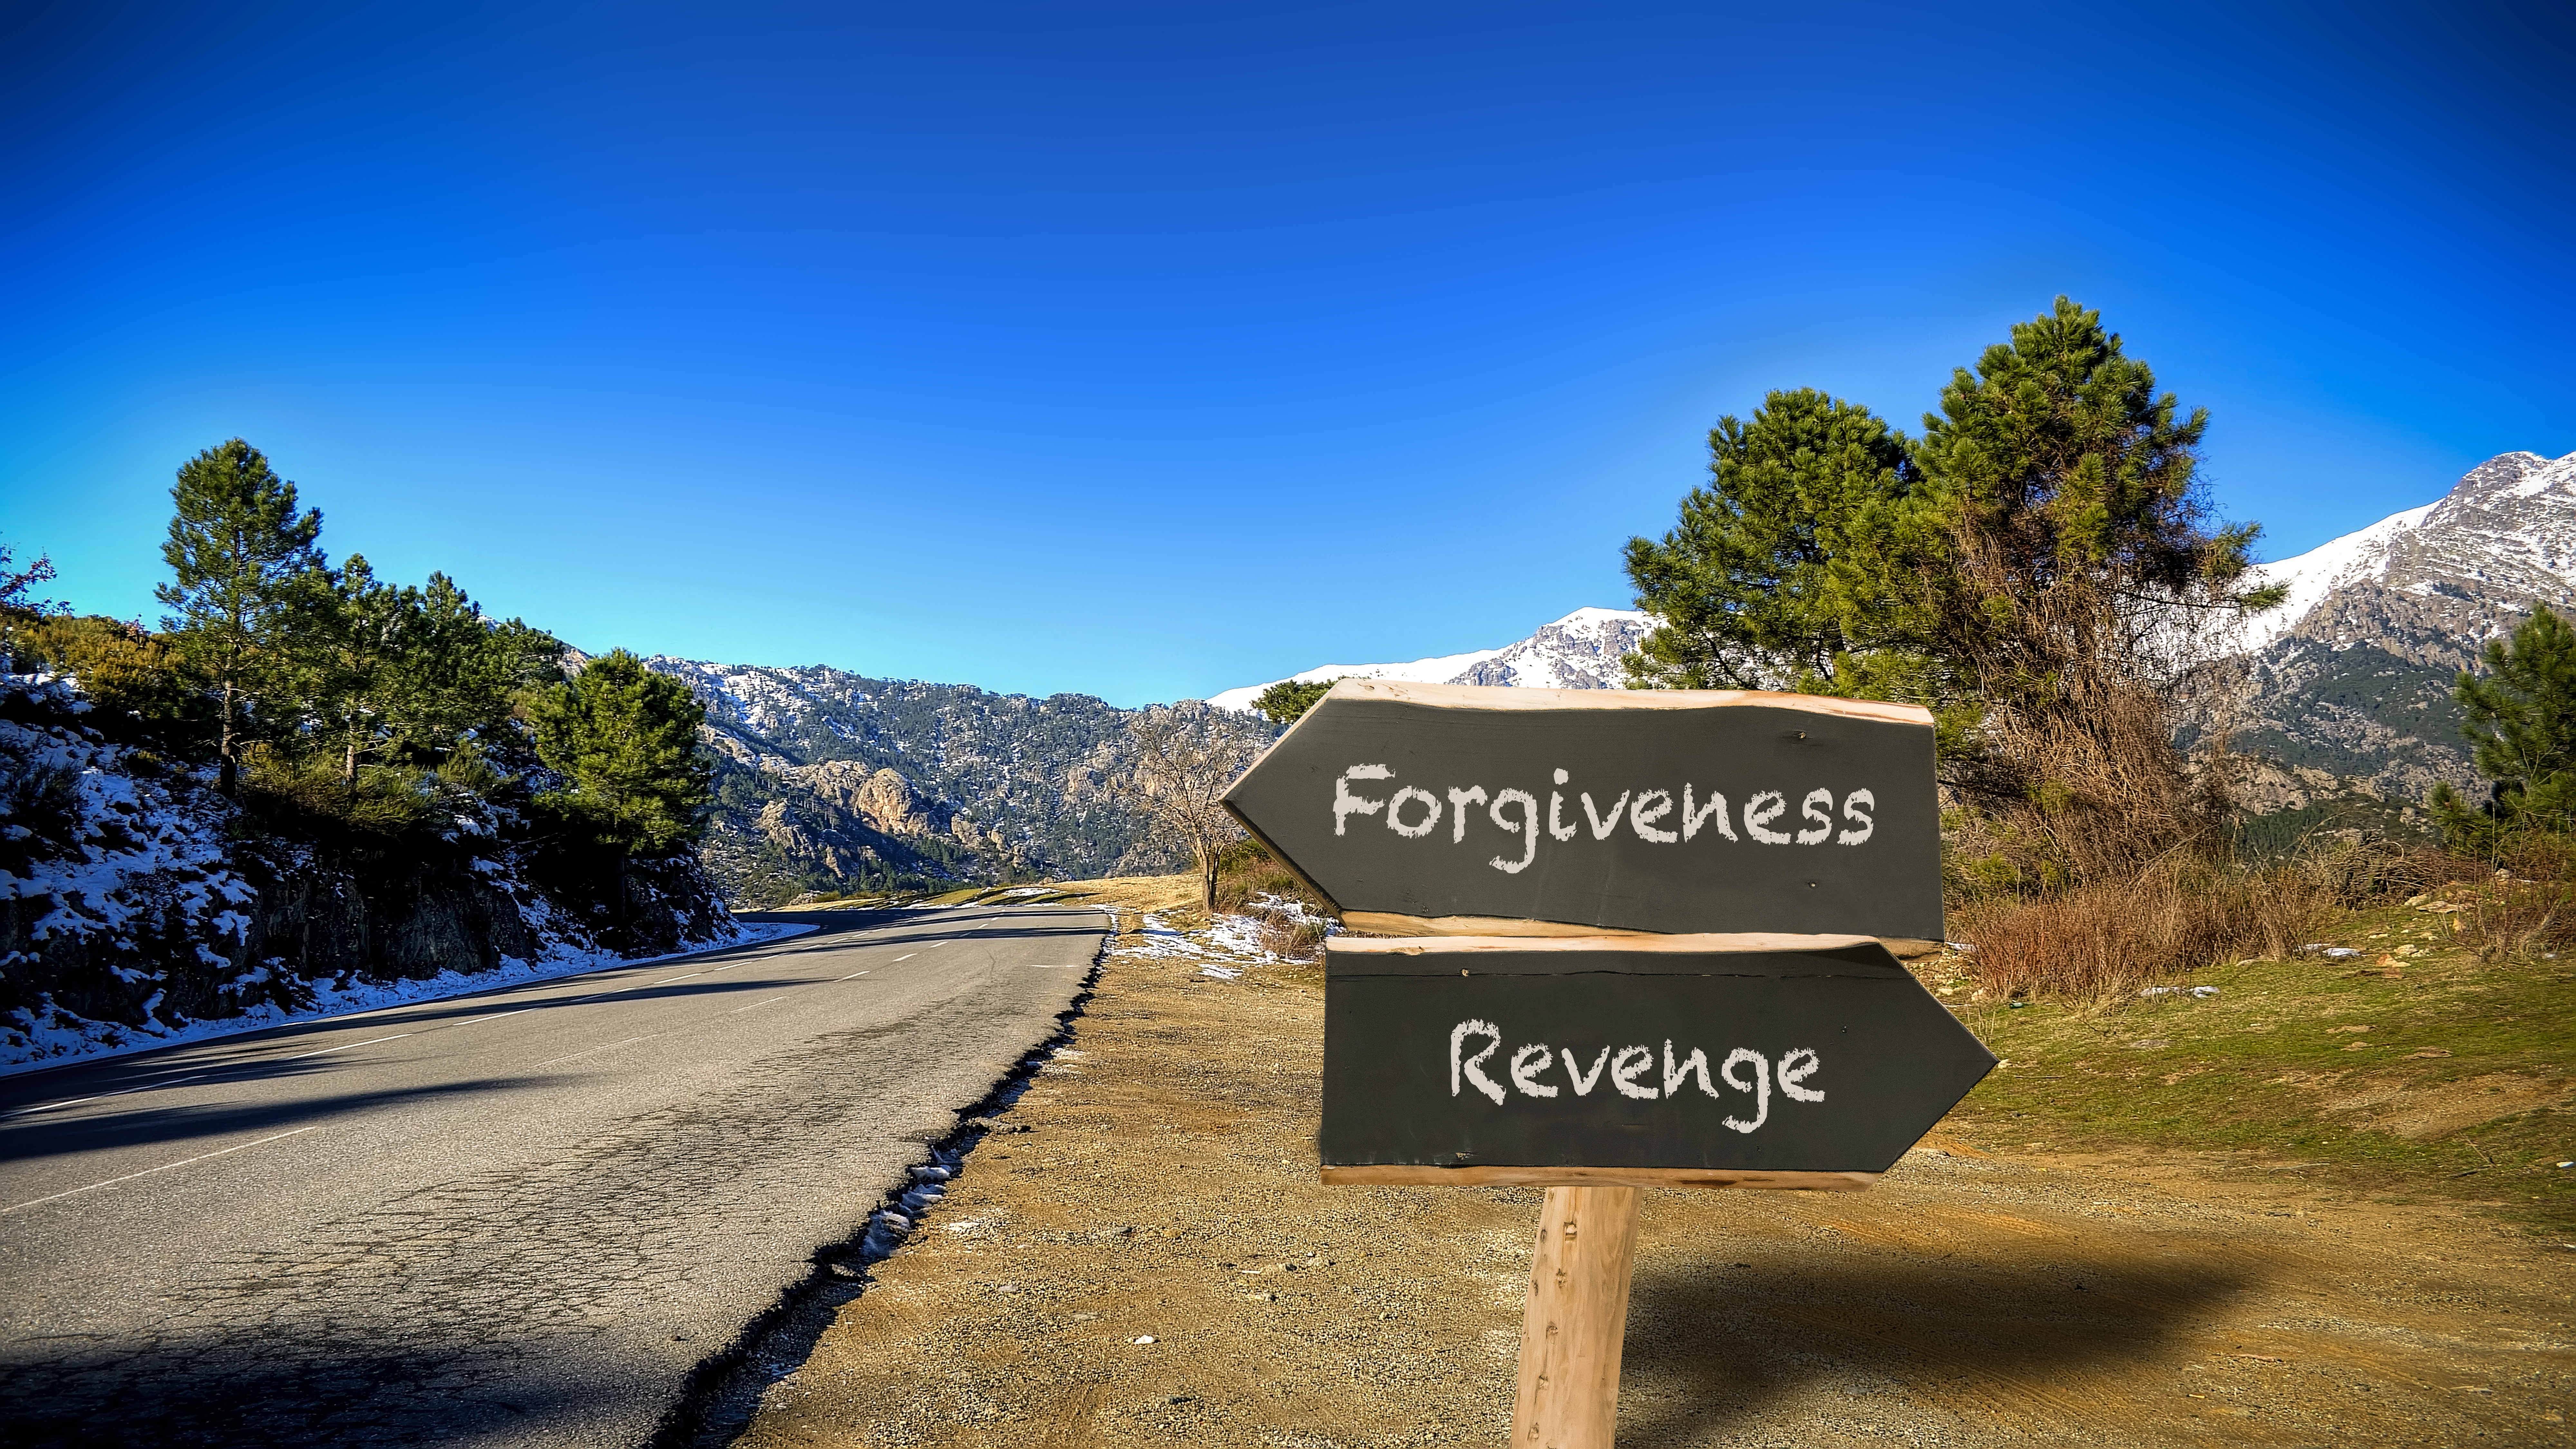 Road signs labelled "Forgiveness" and "Revenge" | Source: Shutterstock